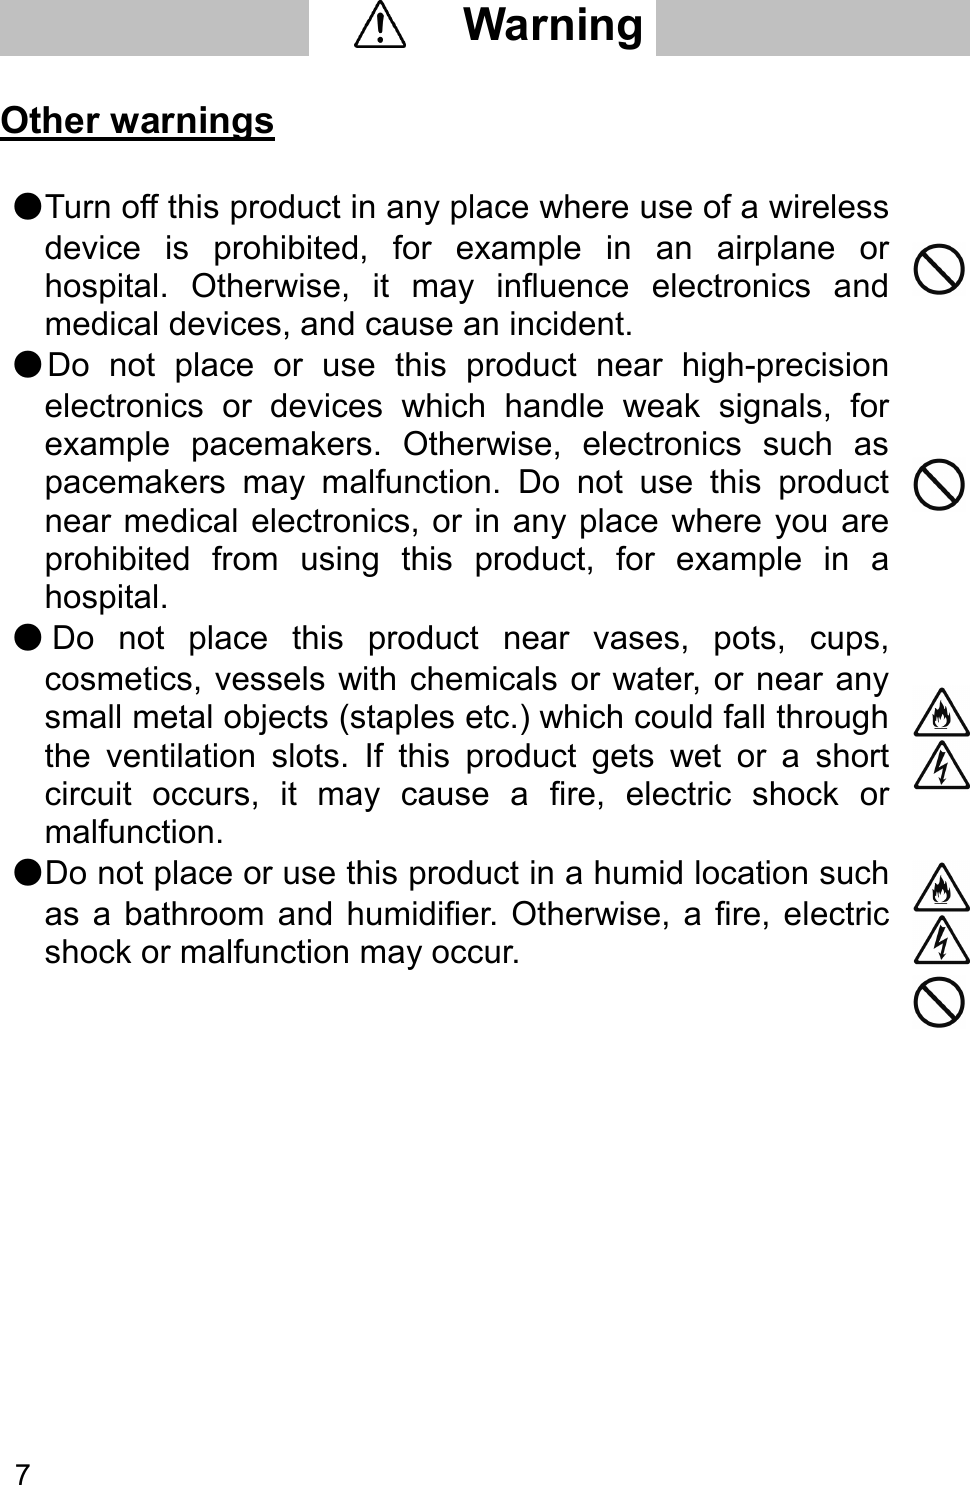   7    Other warnings  ●Turn off this product in any place where use of a wireless device  is  prohibited,  for  example  in  an  airplane  or hospital.  Otherwise,  it  may  influence  electronics  and medical devices, and cause an incident.  ●Do  not  place  or  use  this  product  near  high-precision electronics  or  devices  which  handle  weak  signals,  for example  pacemakers.  Otherwise,  electronics  such  as pacemakers  may  malfunction.  Do  not  use  this  product near medical electronics, or in any place where  you are prohibited  from  using  this  product,  for  example  in  a hospital.  ●Do  not  place  this  product  near  vases,  pots,  cups, cosmetics, vessels with chemicals or water, or near any small metal objects (staples etc.) which could fall through the  ventilation  slots.  If  this  product  gets  wet  or  a  short circuit  occurs,  it  may  cause  a  fire,  electric  shock  or malfunction.  ●Do not place or use this product in a humid location such as  a  bathroom  and  humidifier. Otherwise,  a  fire,  electric shock or malfunction may occur.          Warning     